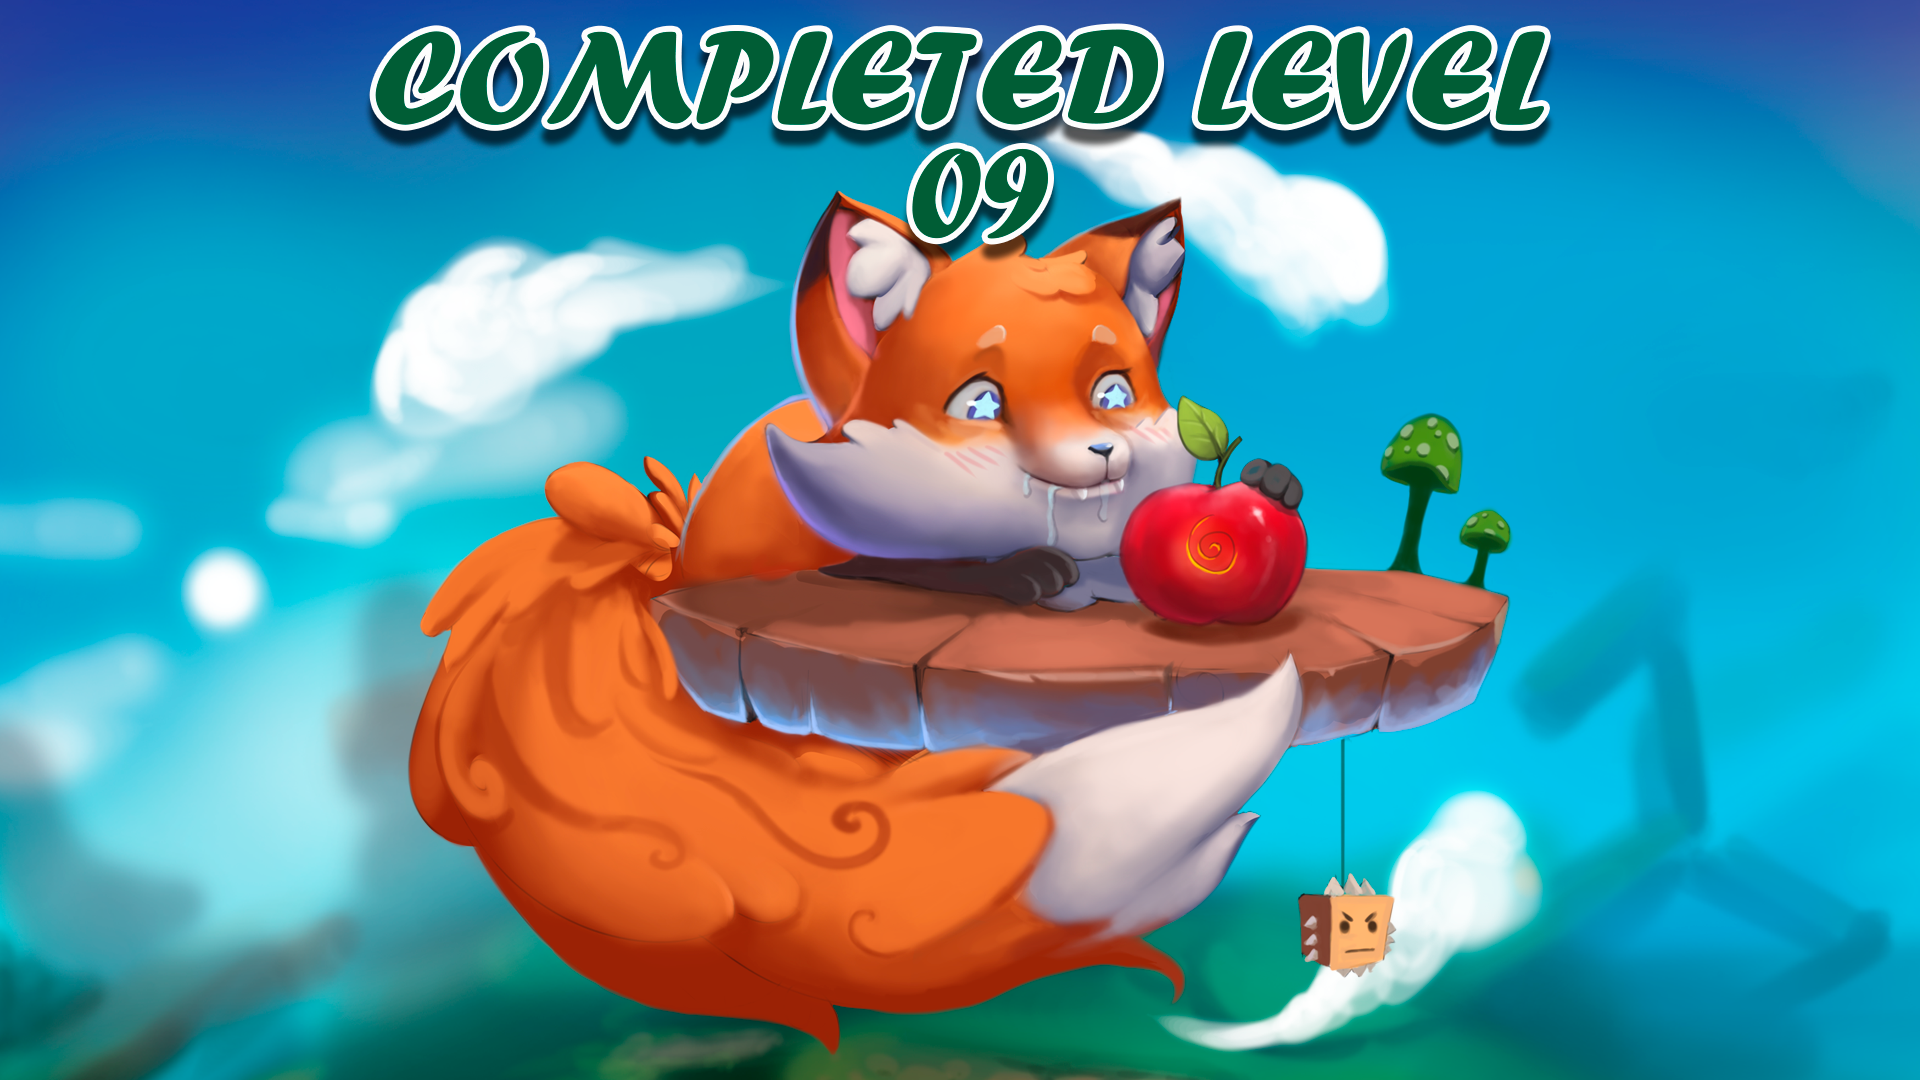 9 levels completed